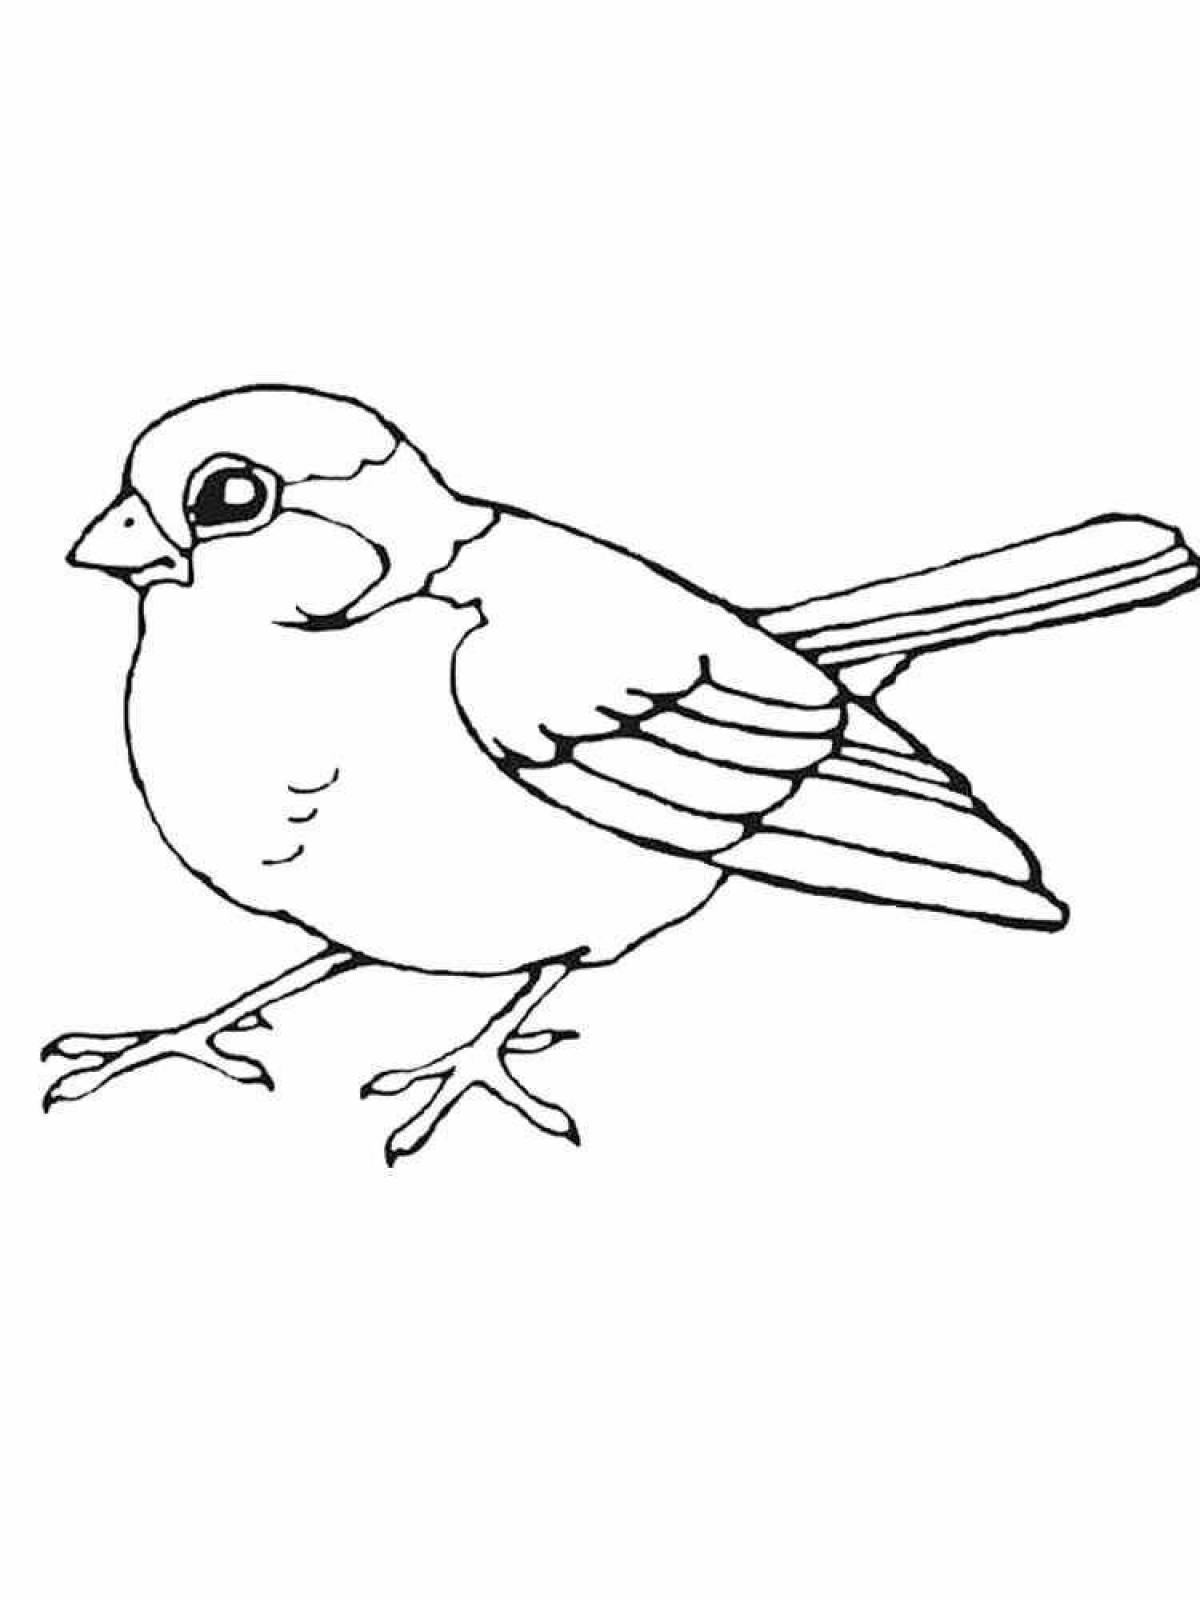 A wonderful sparrow coloring for children 3-4 years old